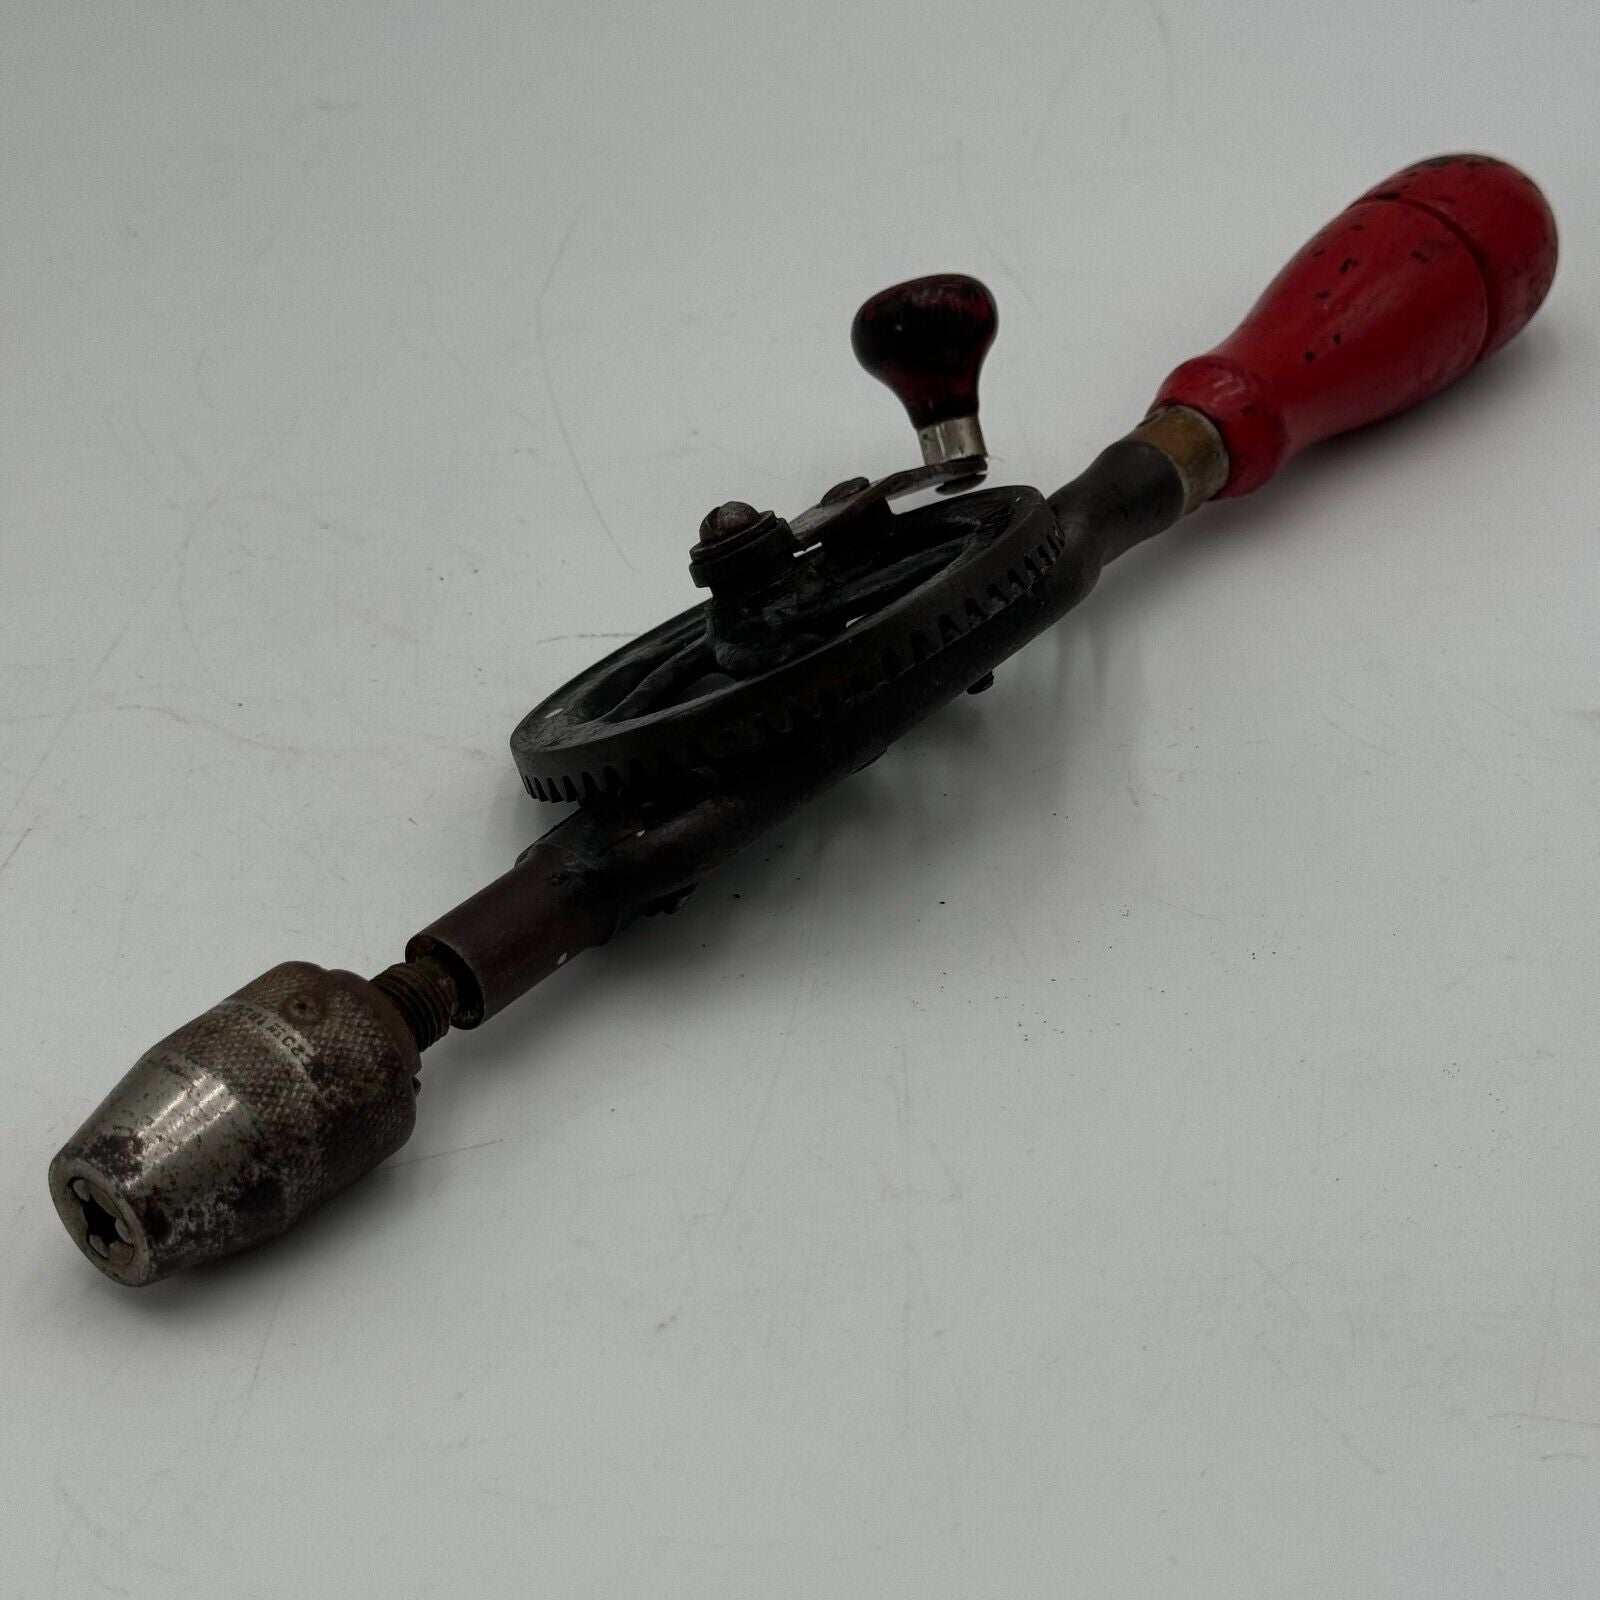 Vintage Millers Falls No 1 Drill Eggbeater Hand Drill Wood Handles 1/4" Drive